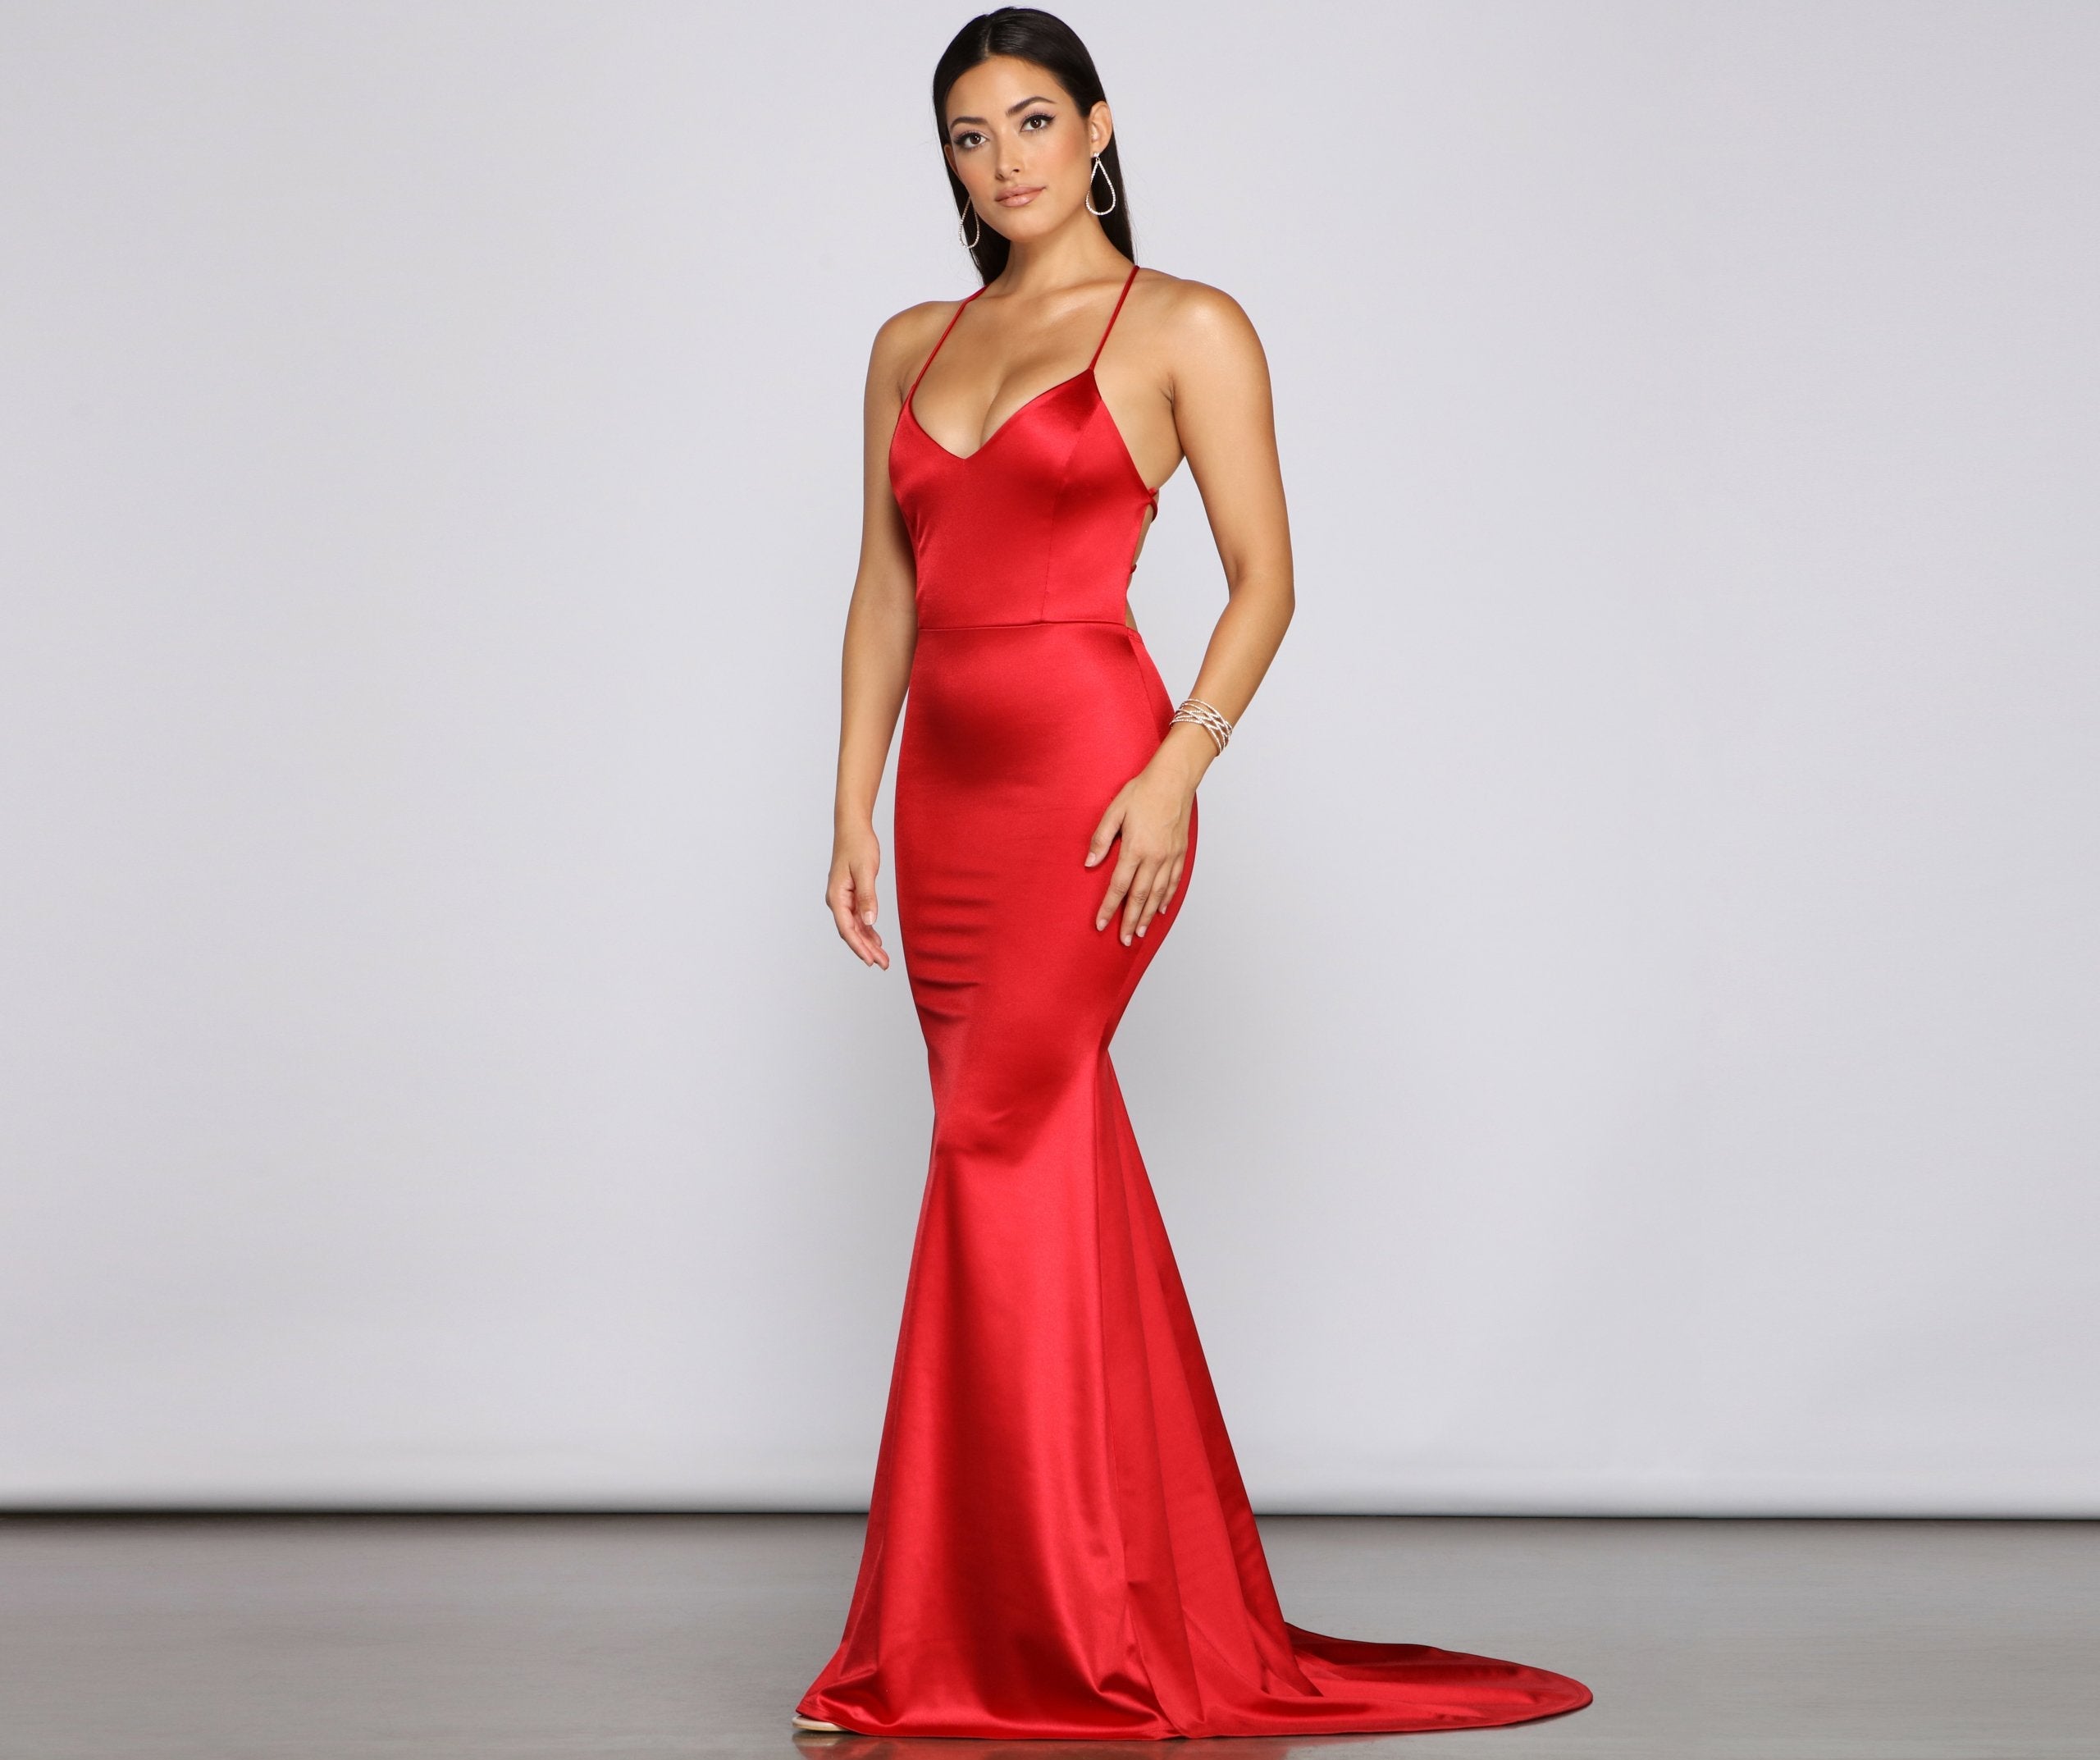 Nola Darling Satin Evening Gown - Lady Occasions